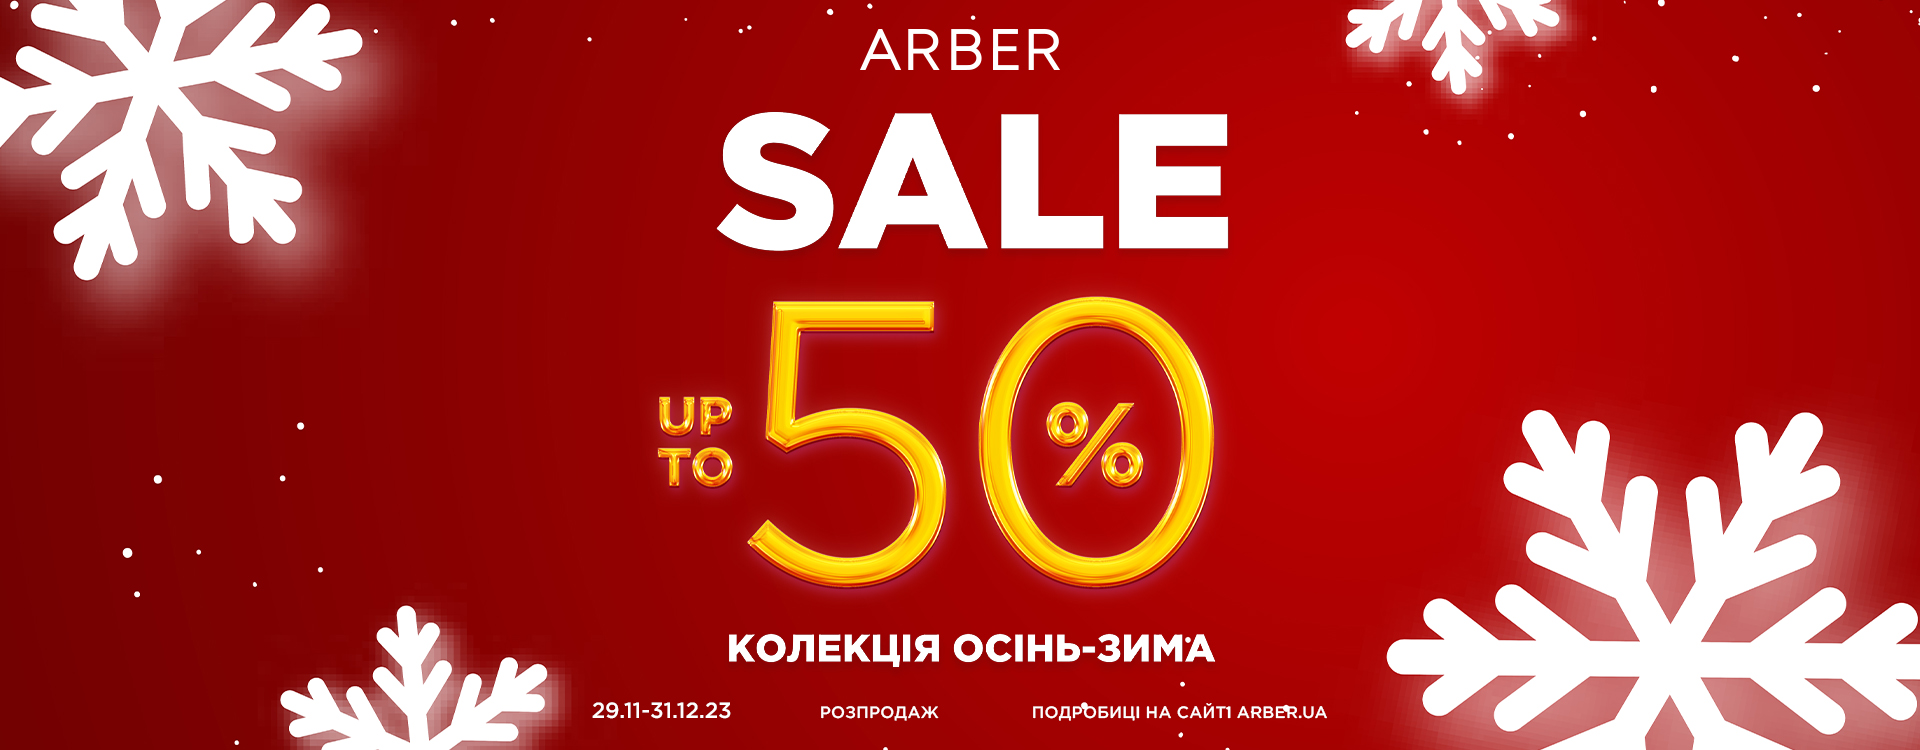 Big sale at ARBER with discounts up to -50%